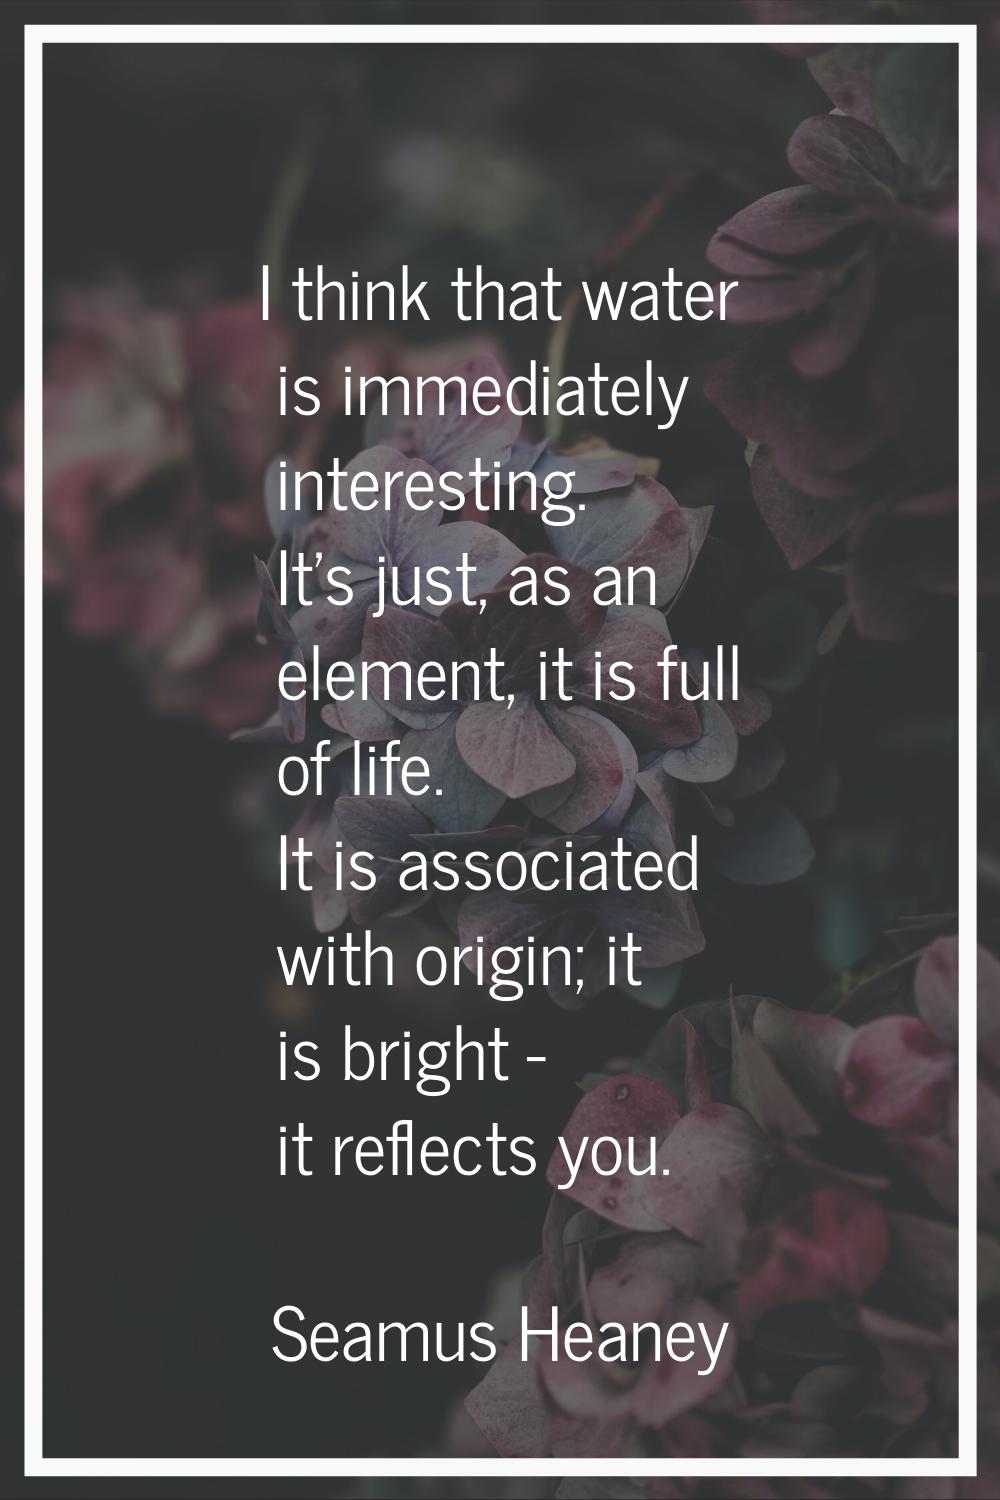 I think that water is immediately interesting. It's just, as an element, it is full of life. It is 